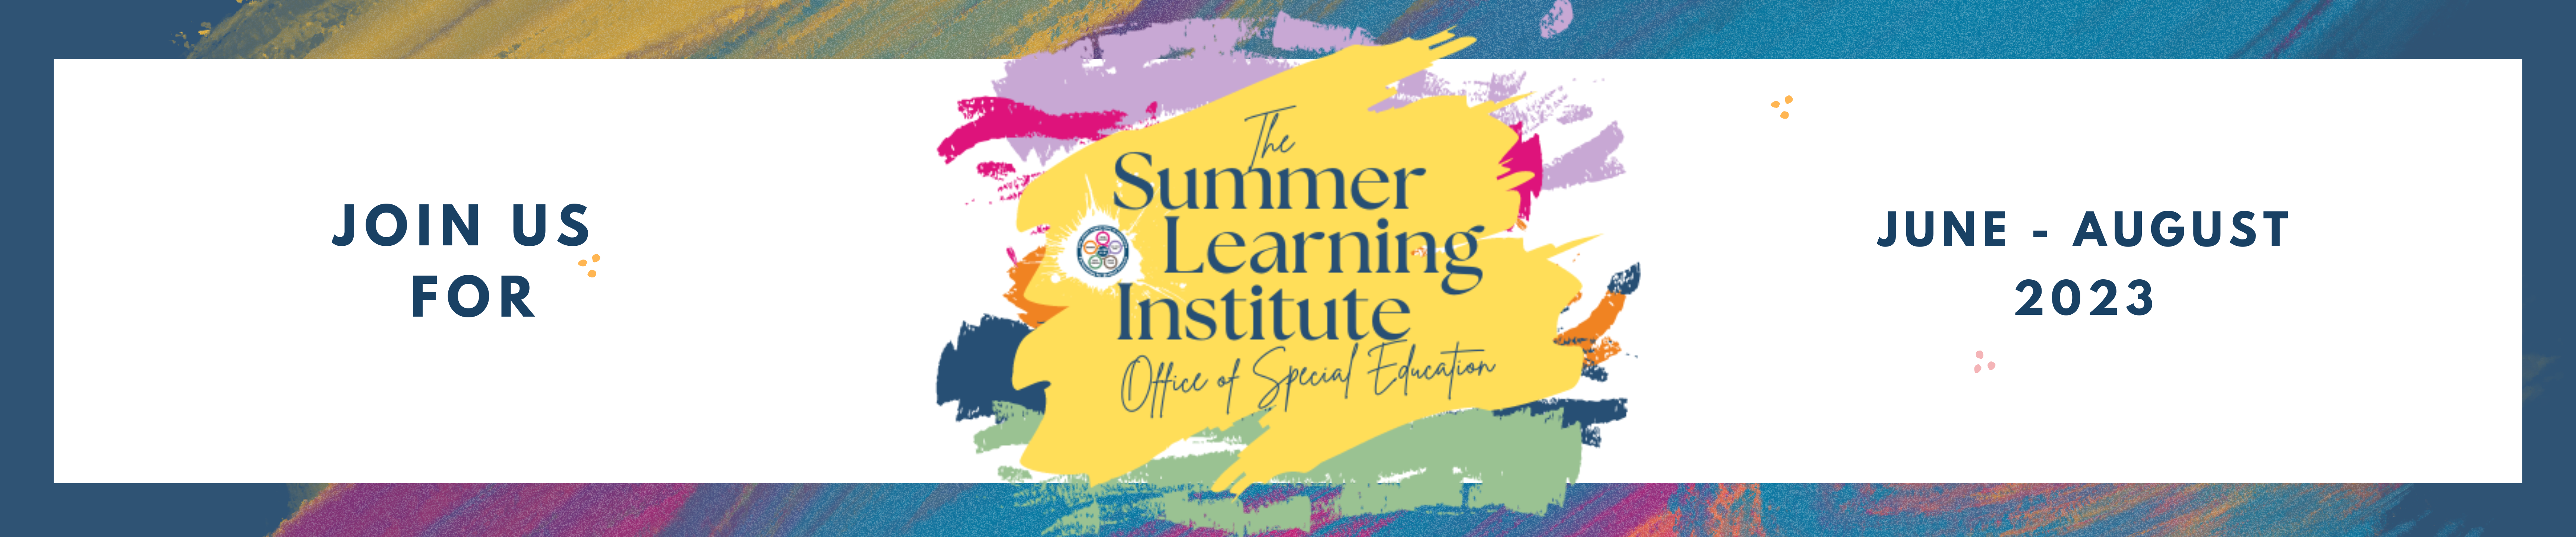 summer institute banner with border inviting guests to join us for training june through august of 2023 with the logo for the summer institute in the middle